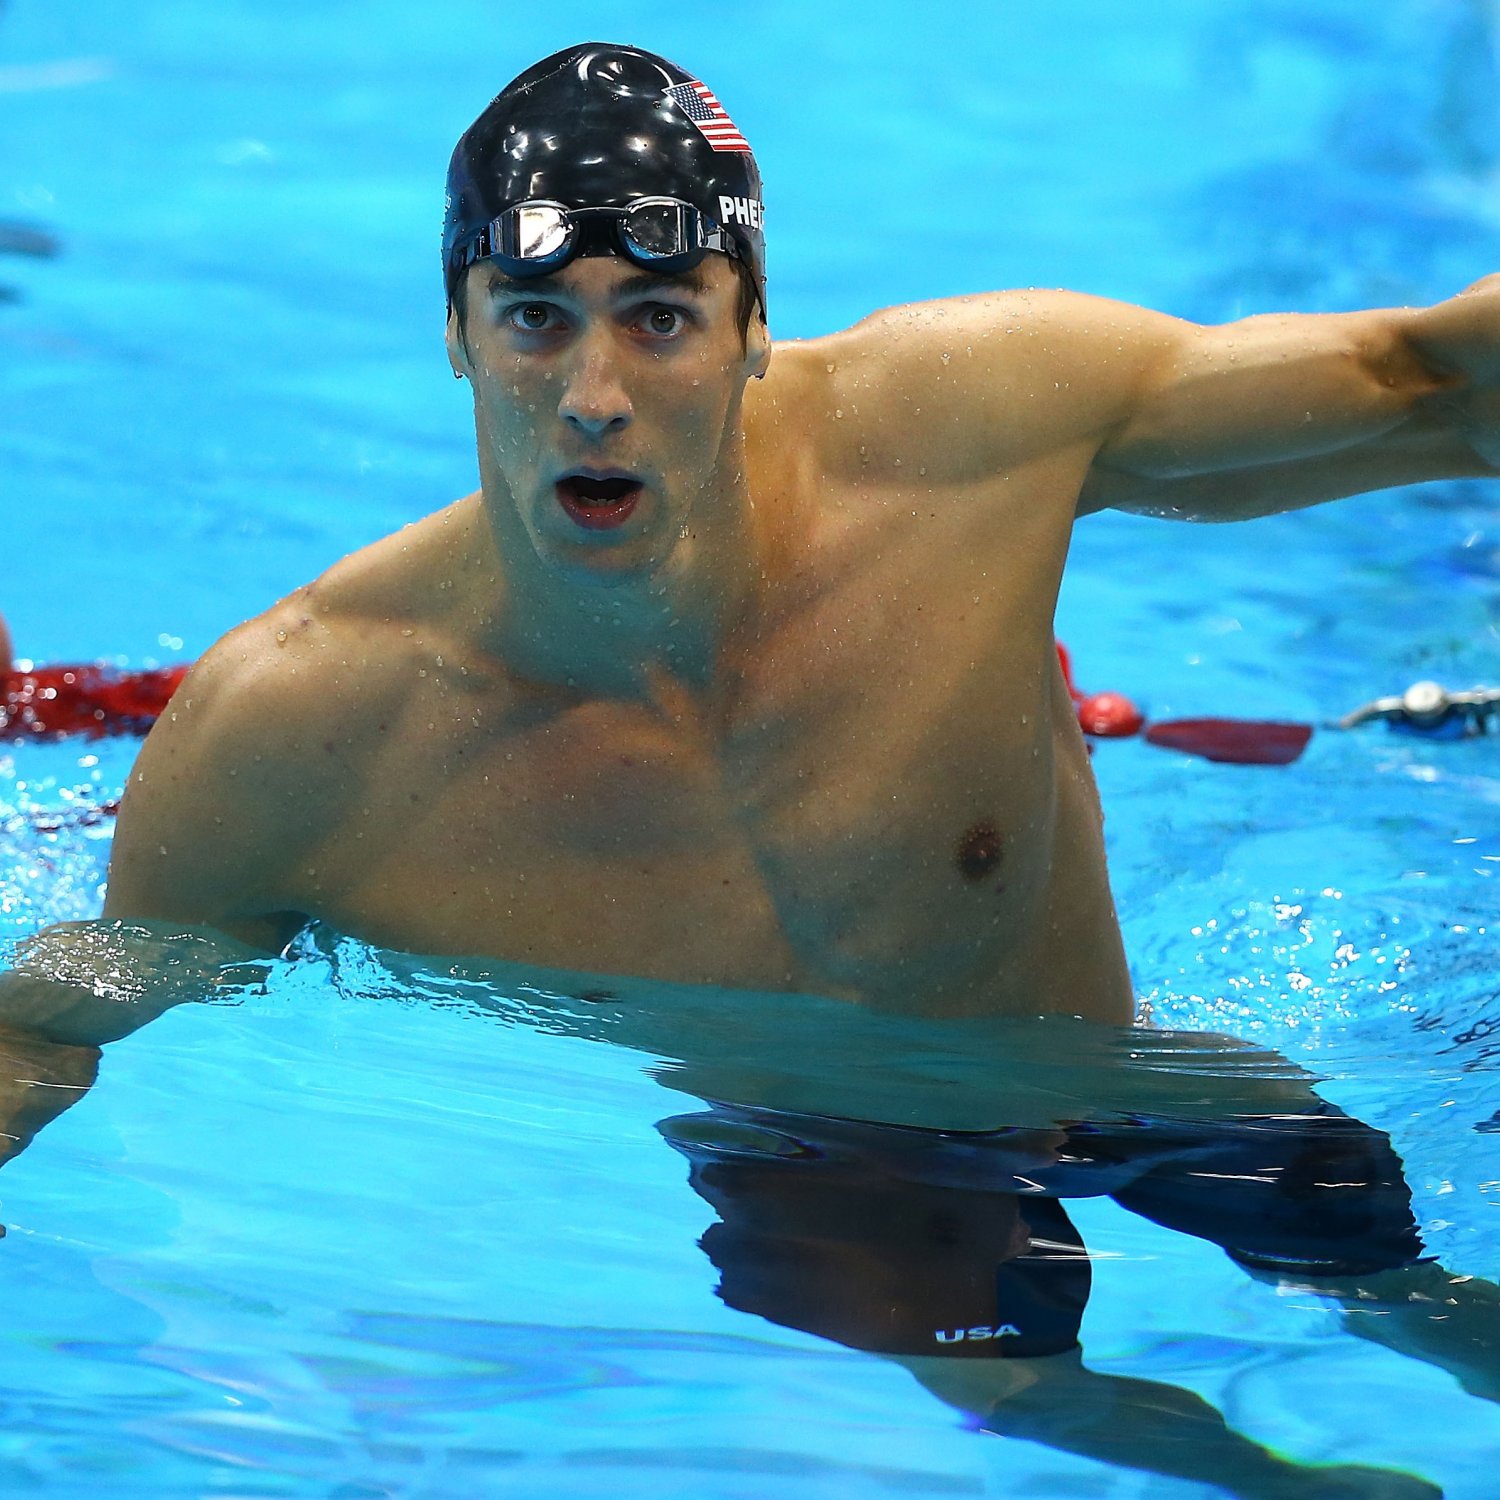 Top 92+ Images pictures of michael phelps swimming Updated